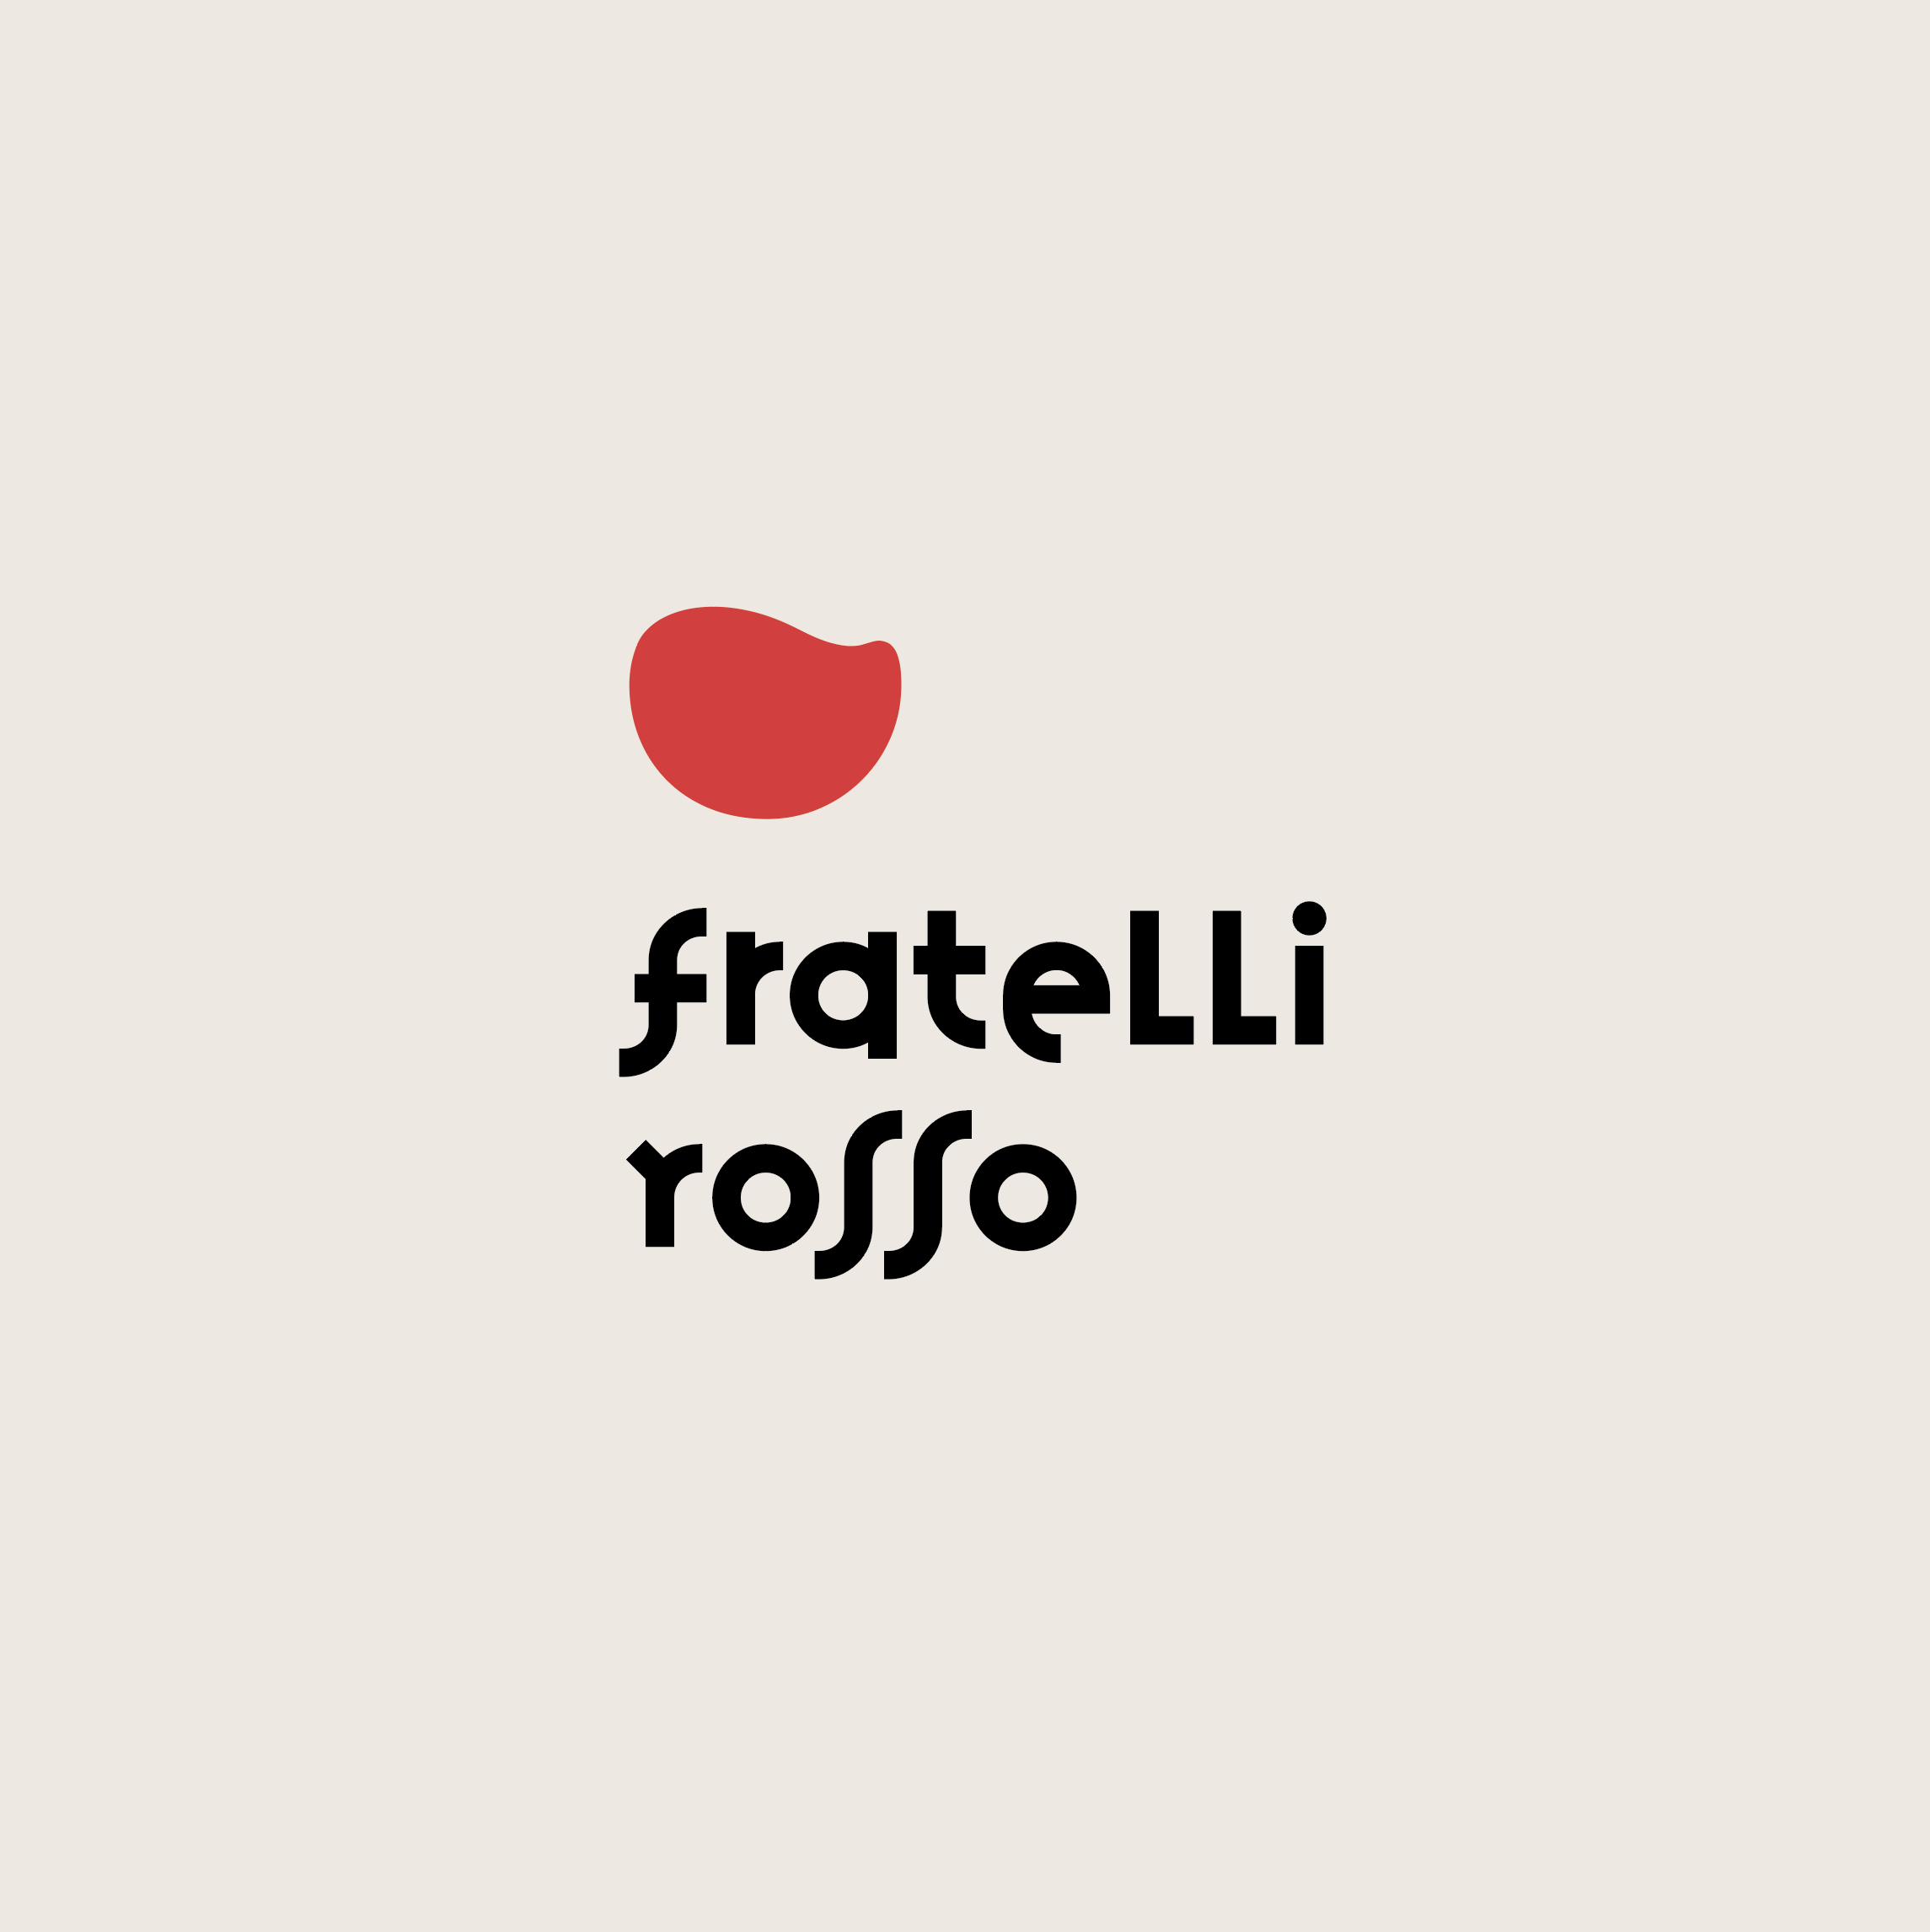 Fratelli Rosso